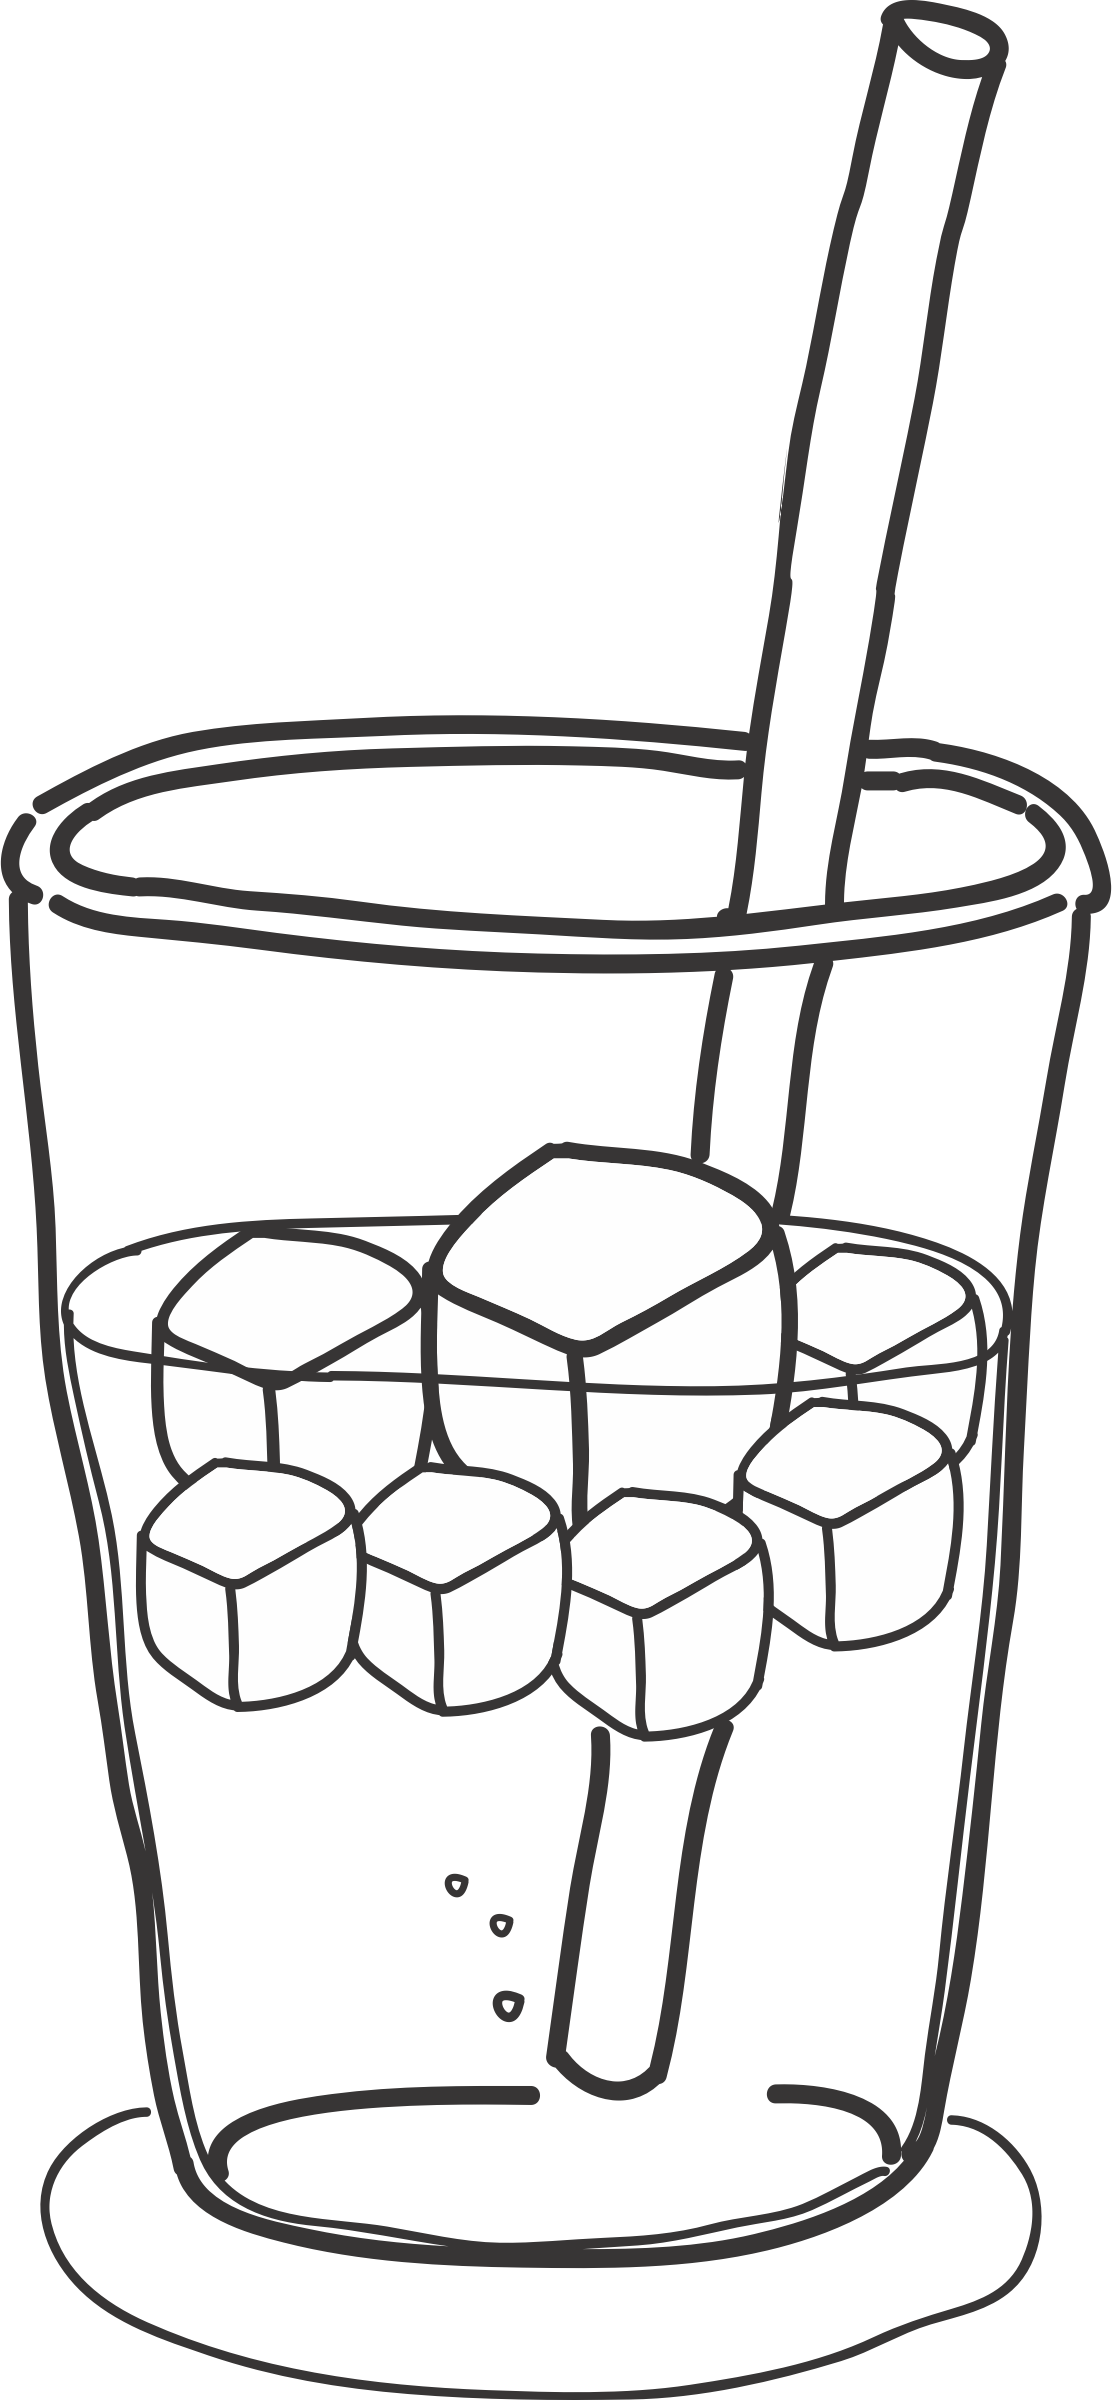 drinks clipart old fashion